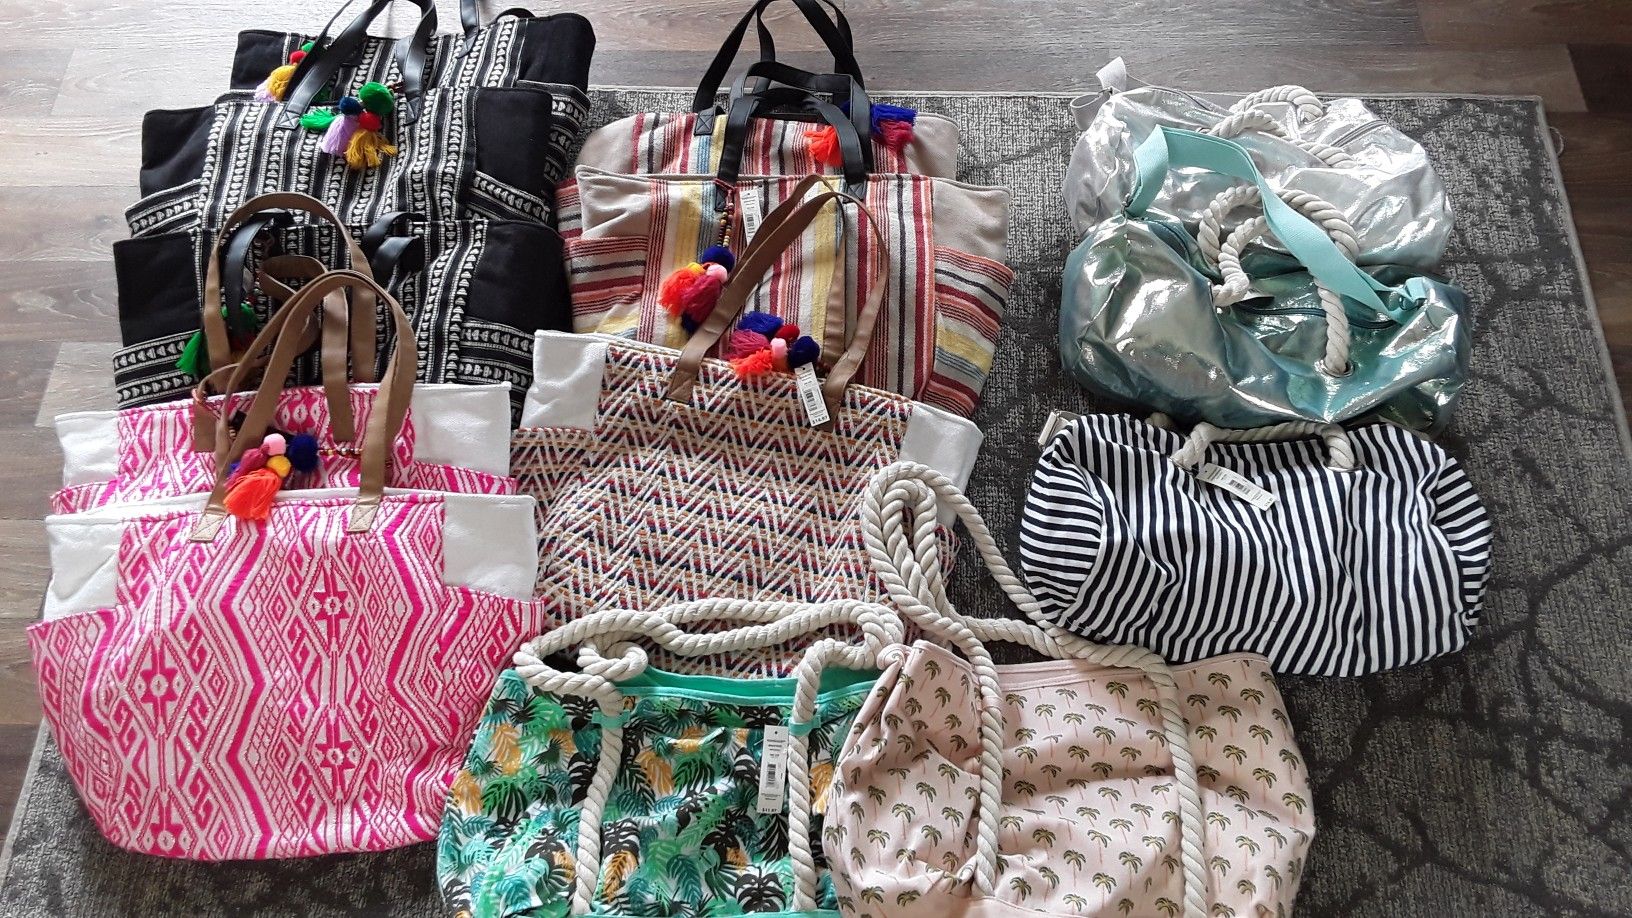 Brand new beach and duffle bags